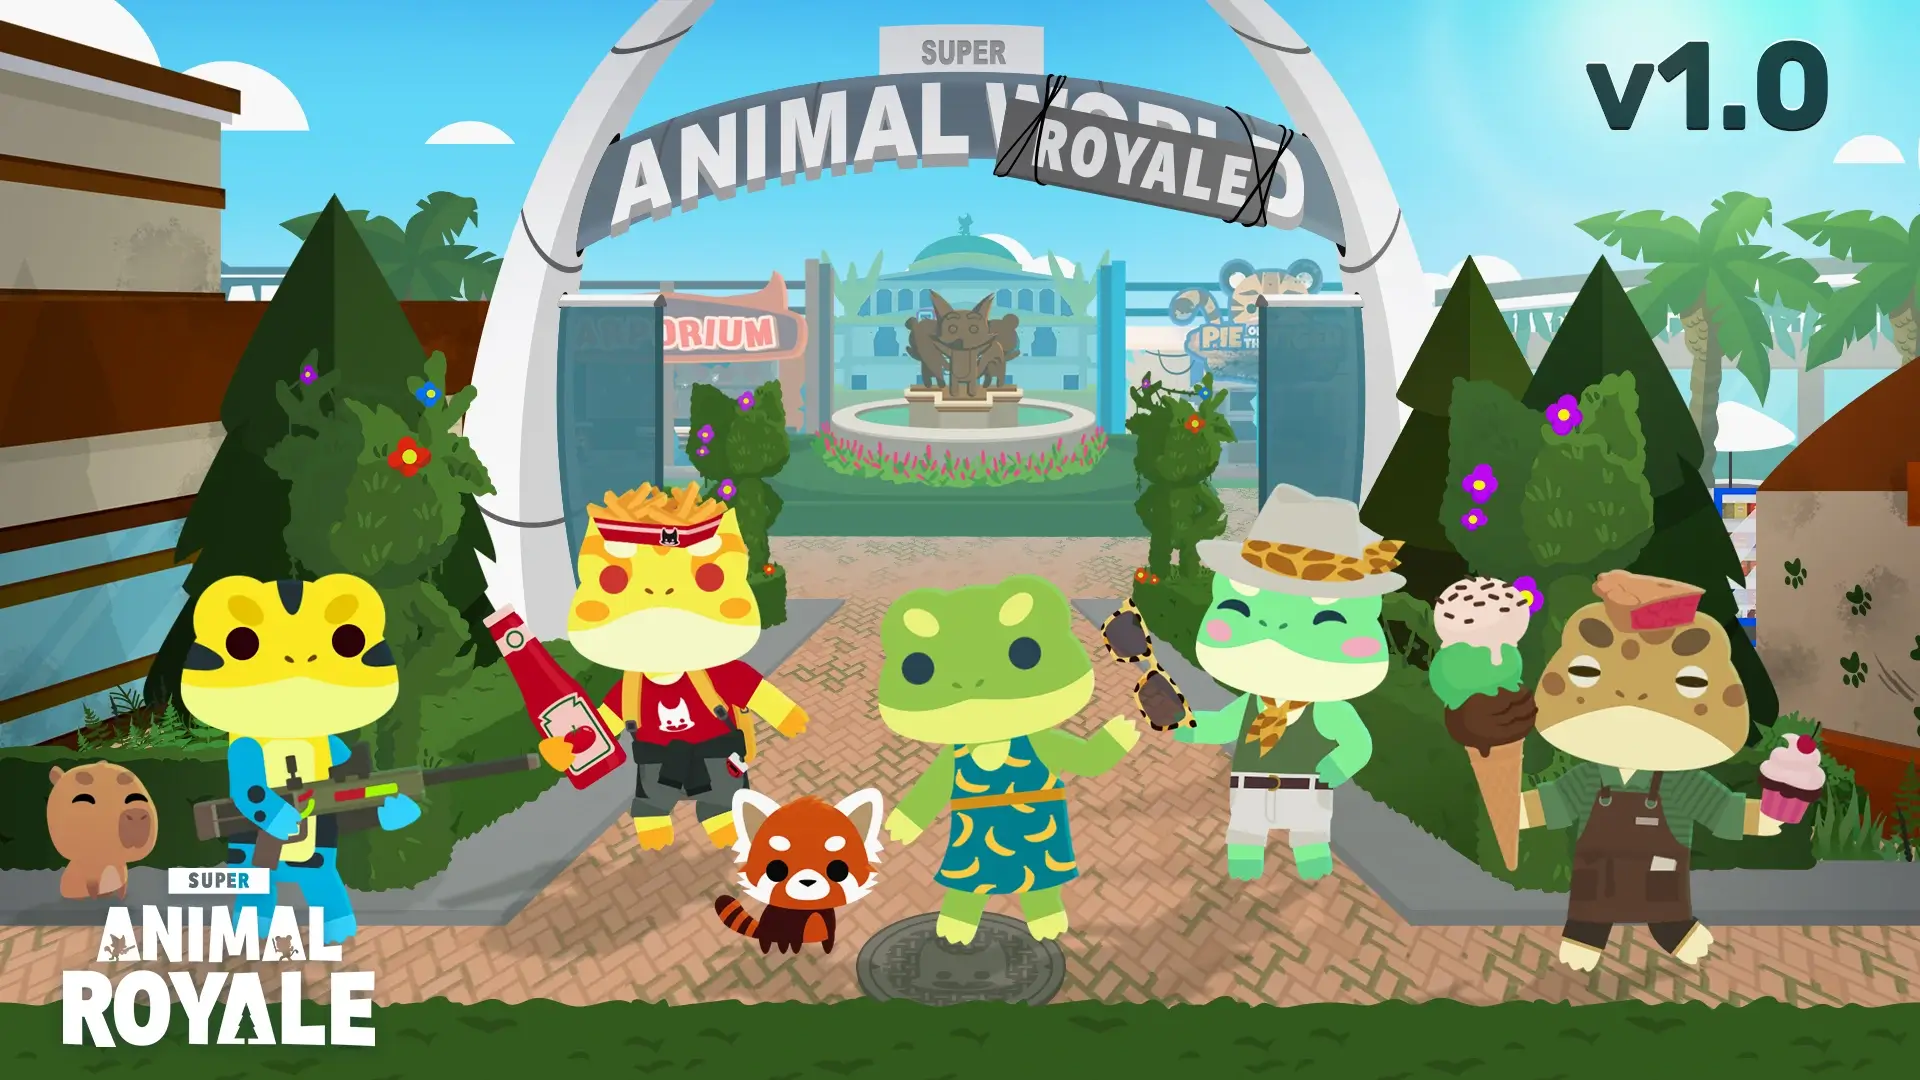 A Super Animal Royale overview